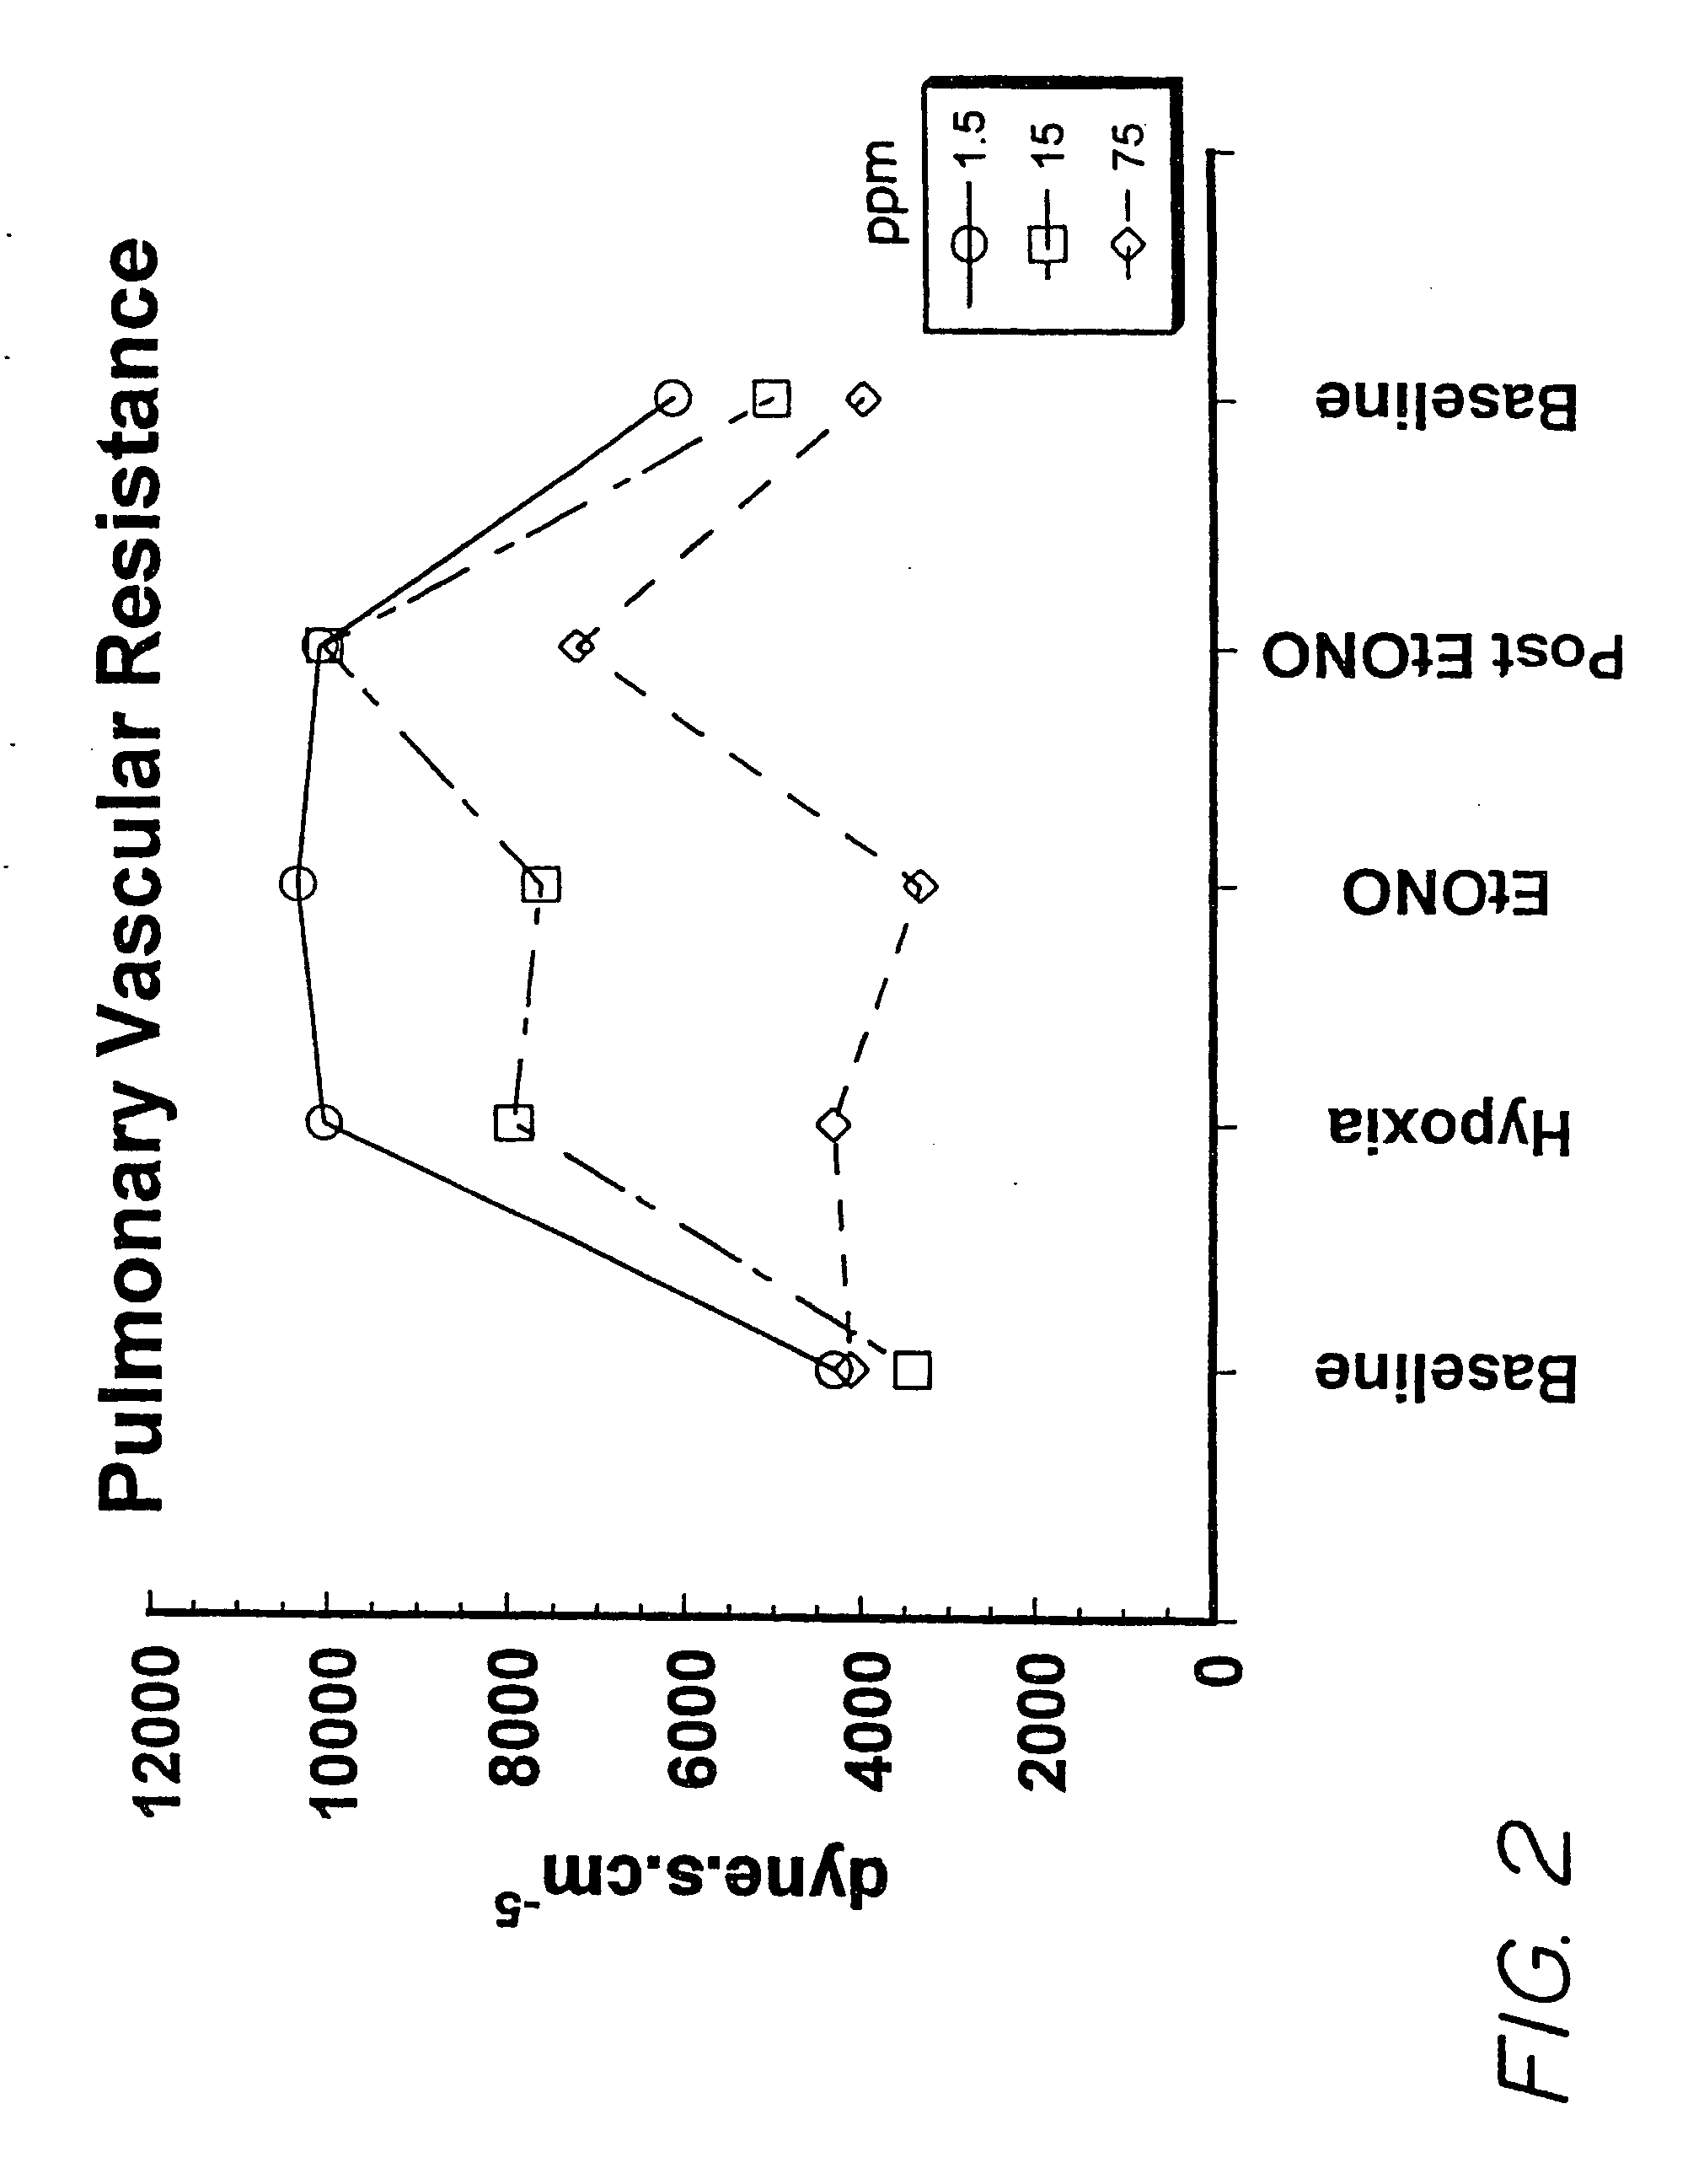 Methods of treating cardio pulmonary diseases with NO group compounds